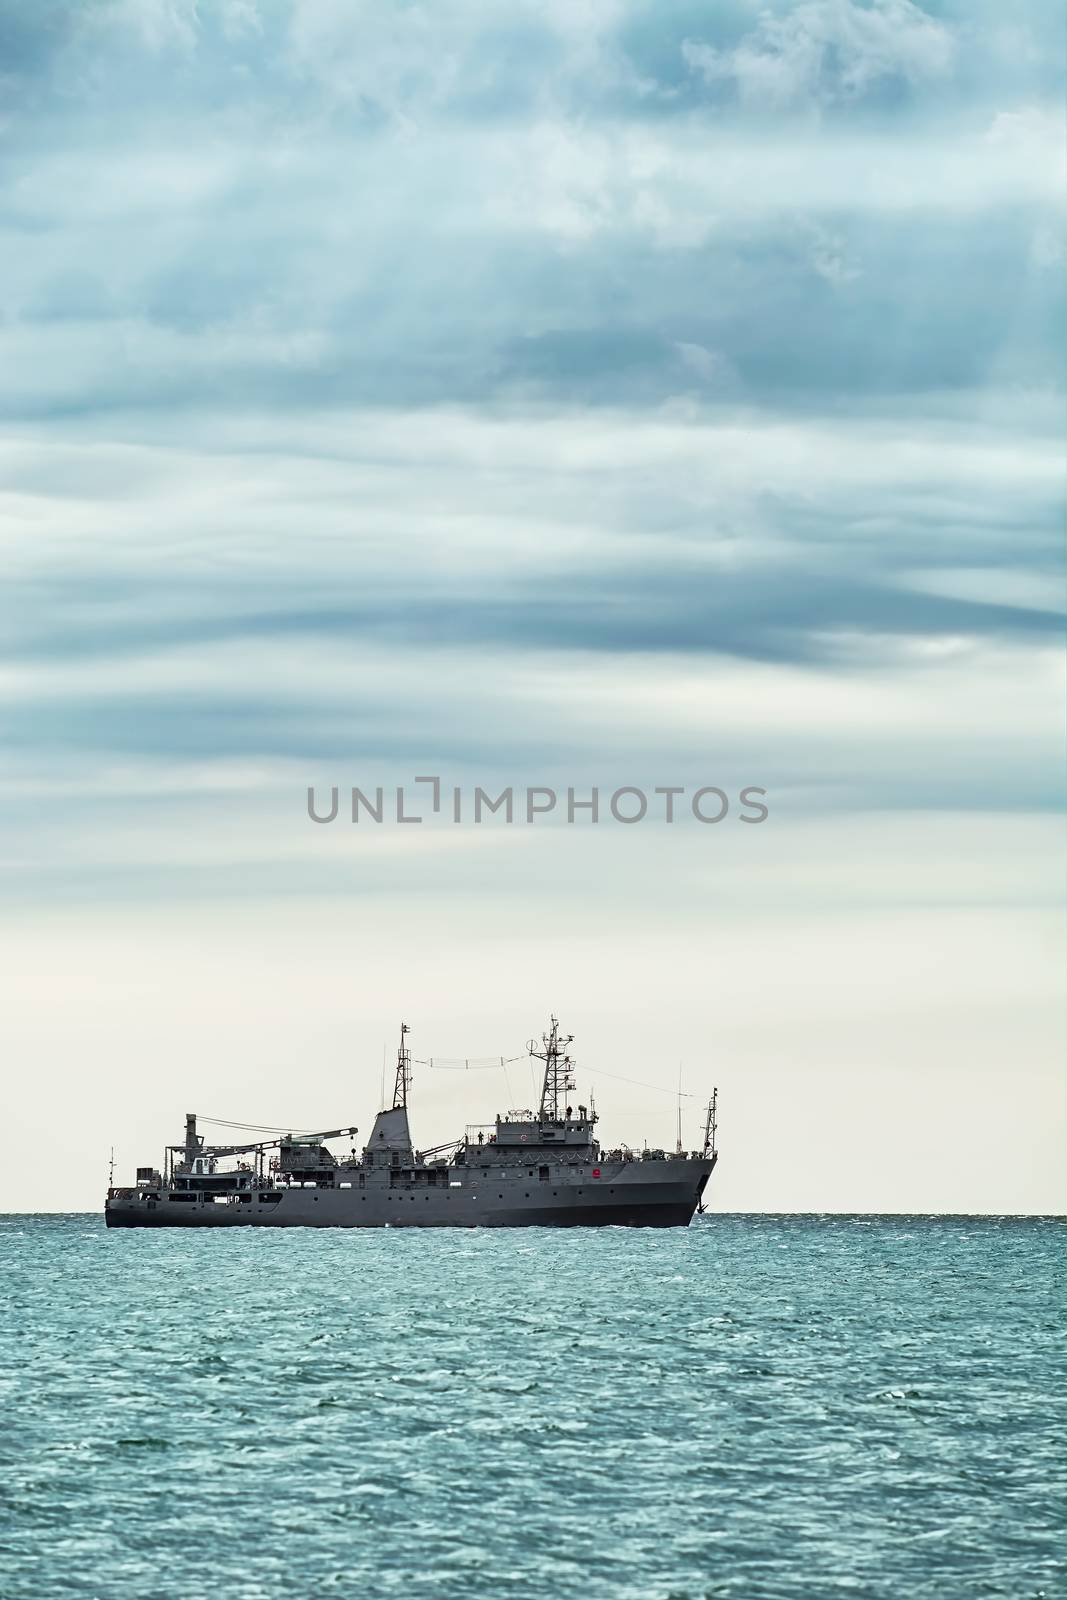 Military Degaussing Ship in the Black Sea